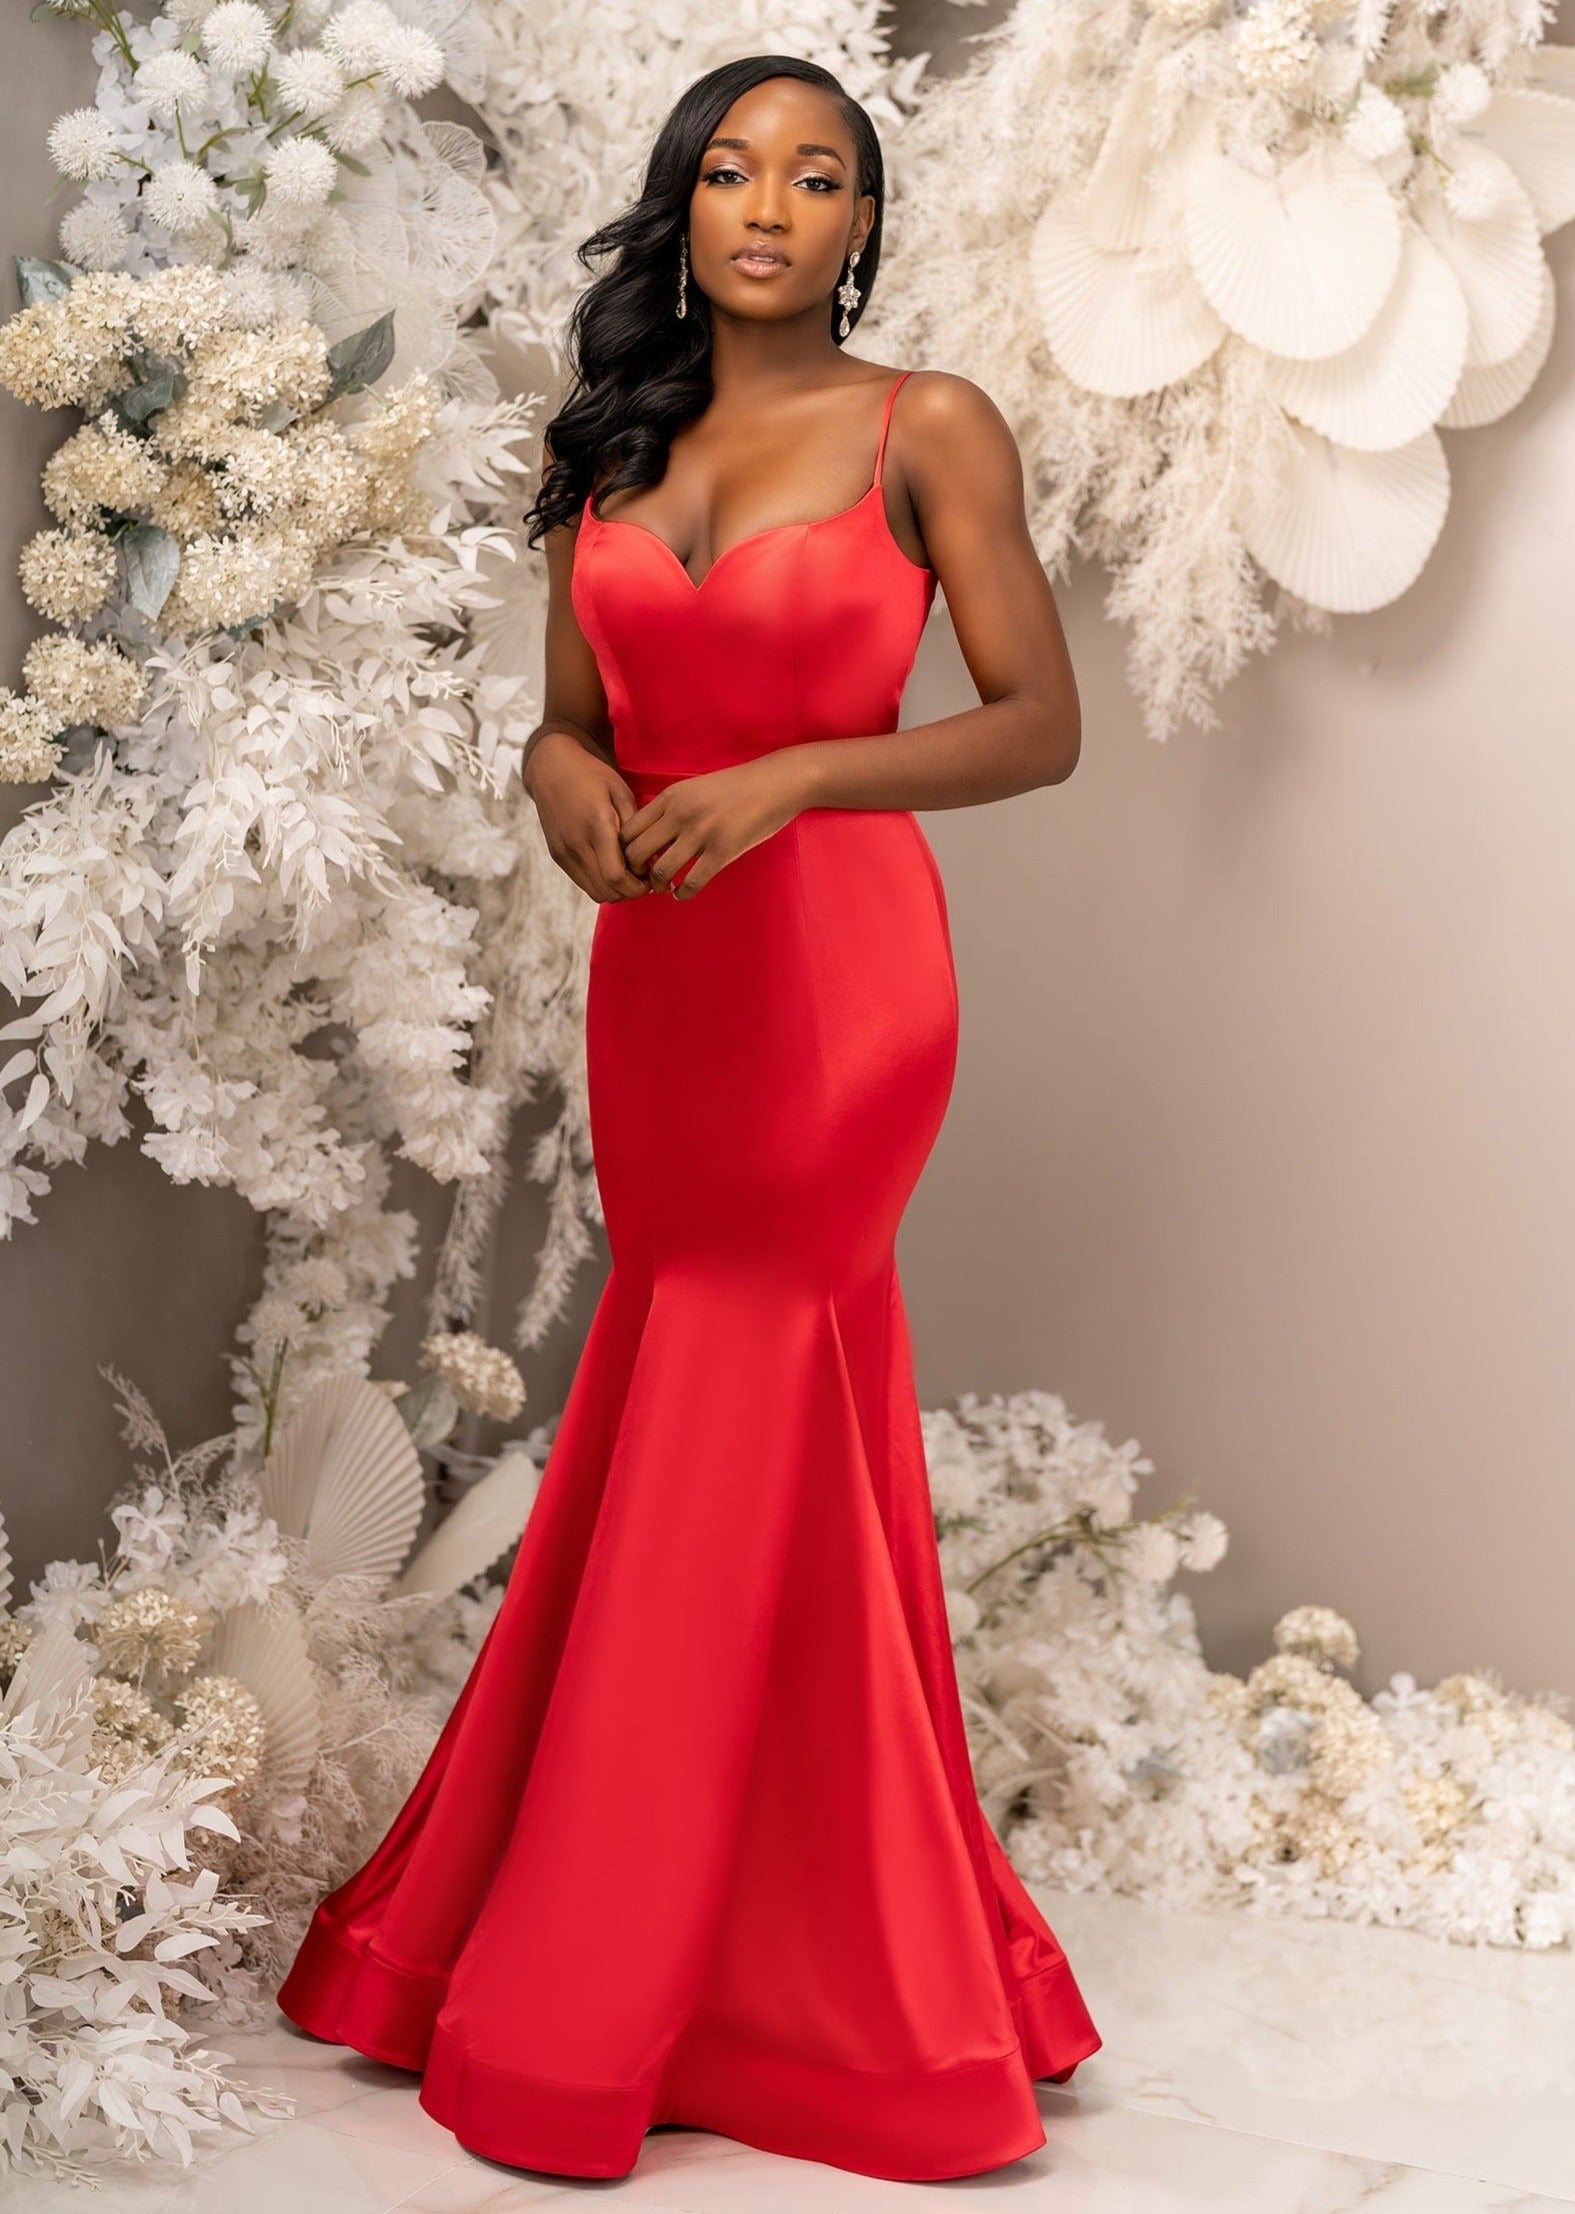 Sexy mermaid bridesmaid dress with spaghetti straps and a sweetheart neckline cinches the waist and shows off the hips with stretch throughout the dress. Shown in bright red on a black model.